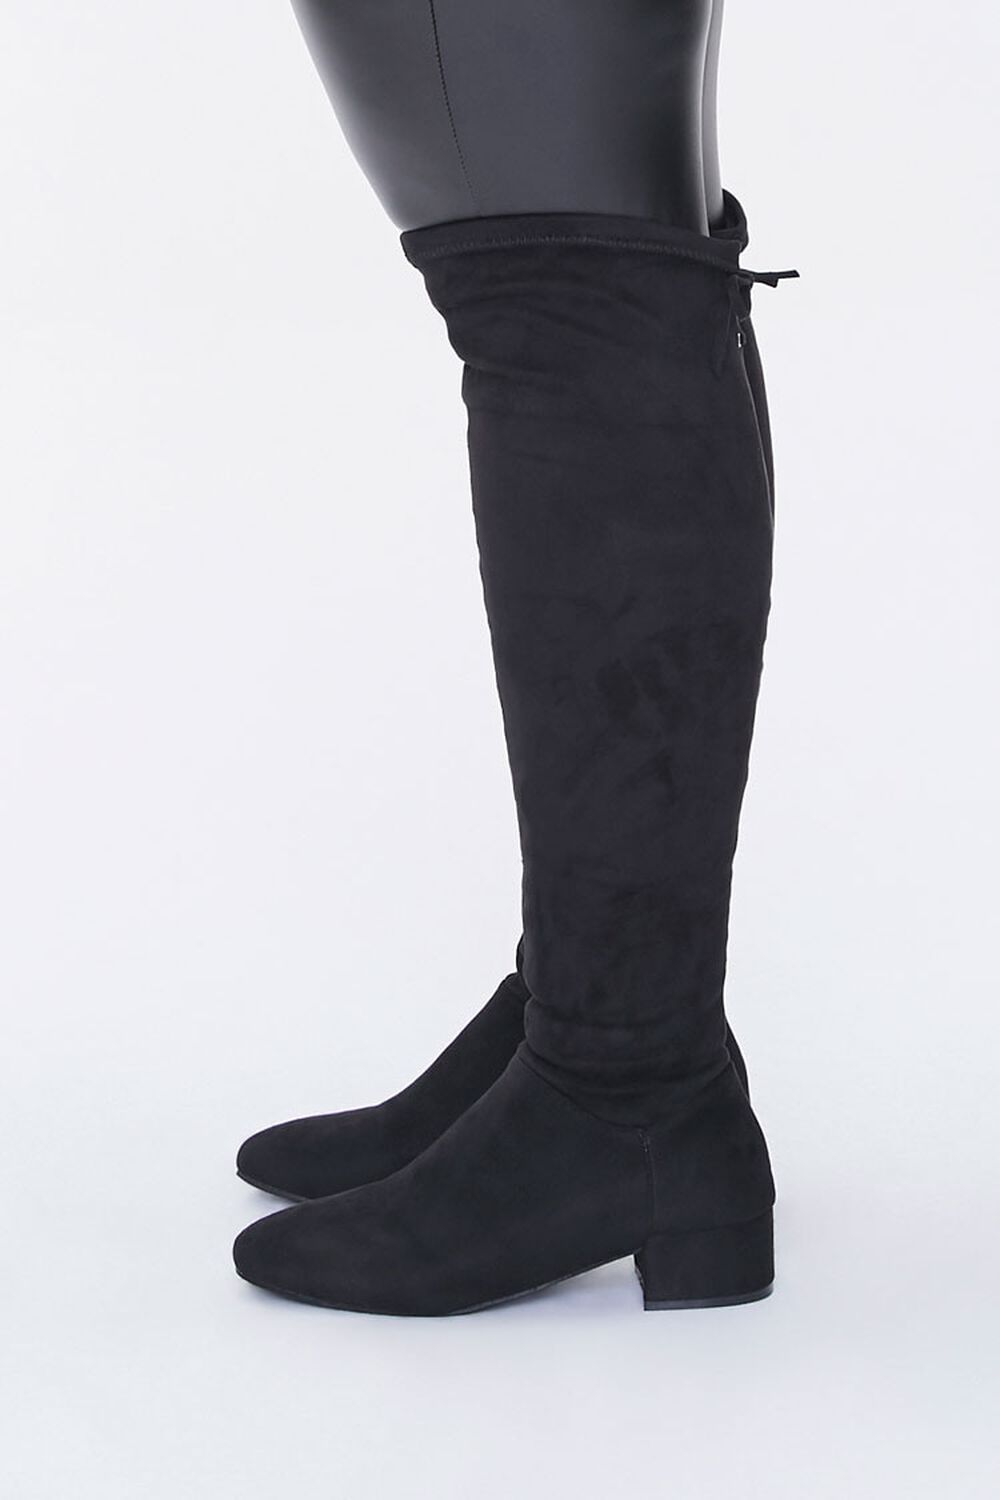 BLACK Faux Suede Knee Boots (Wide), image 2